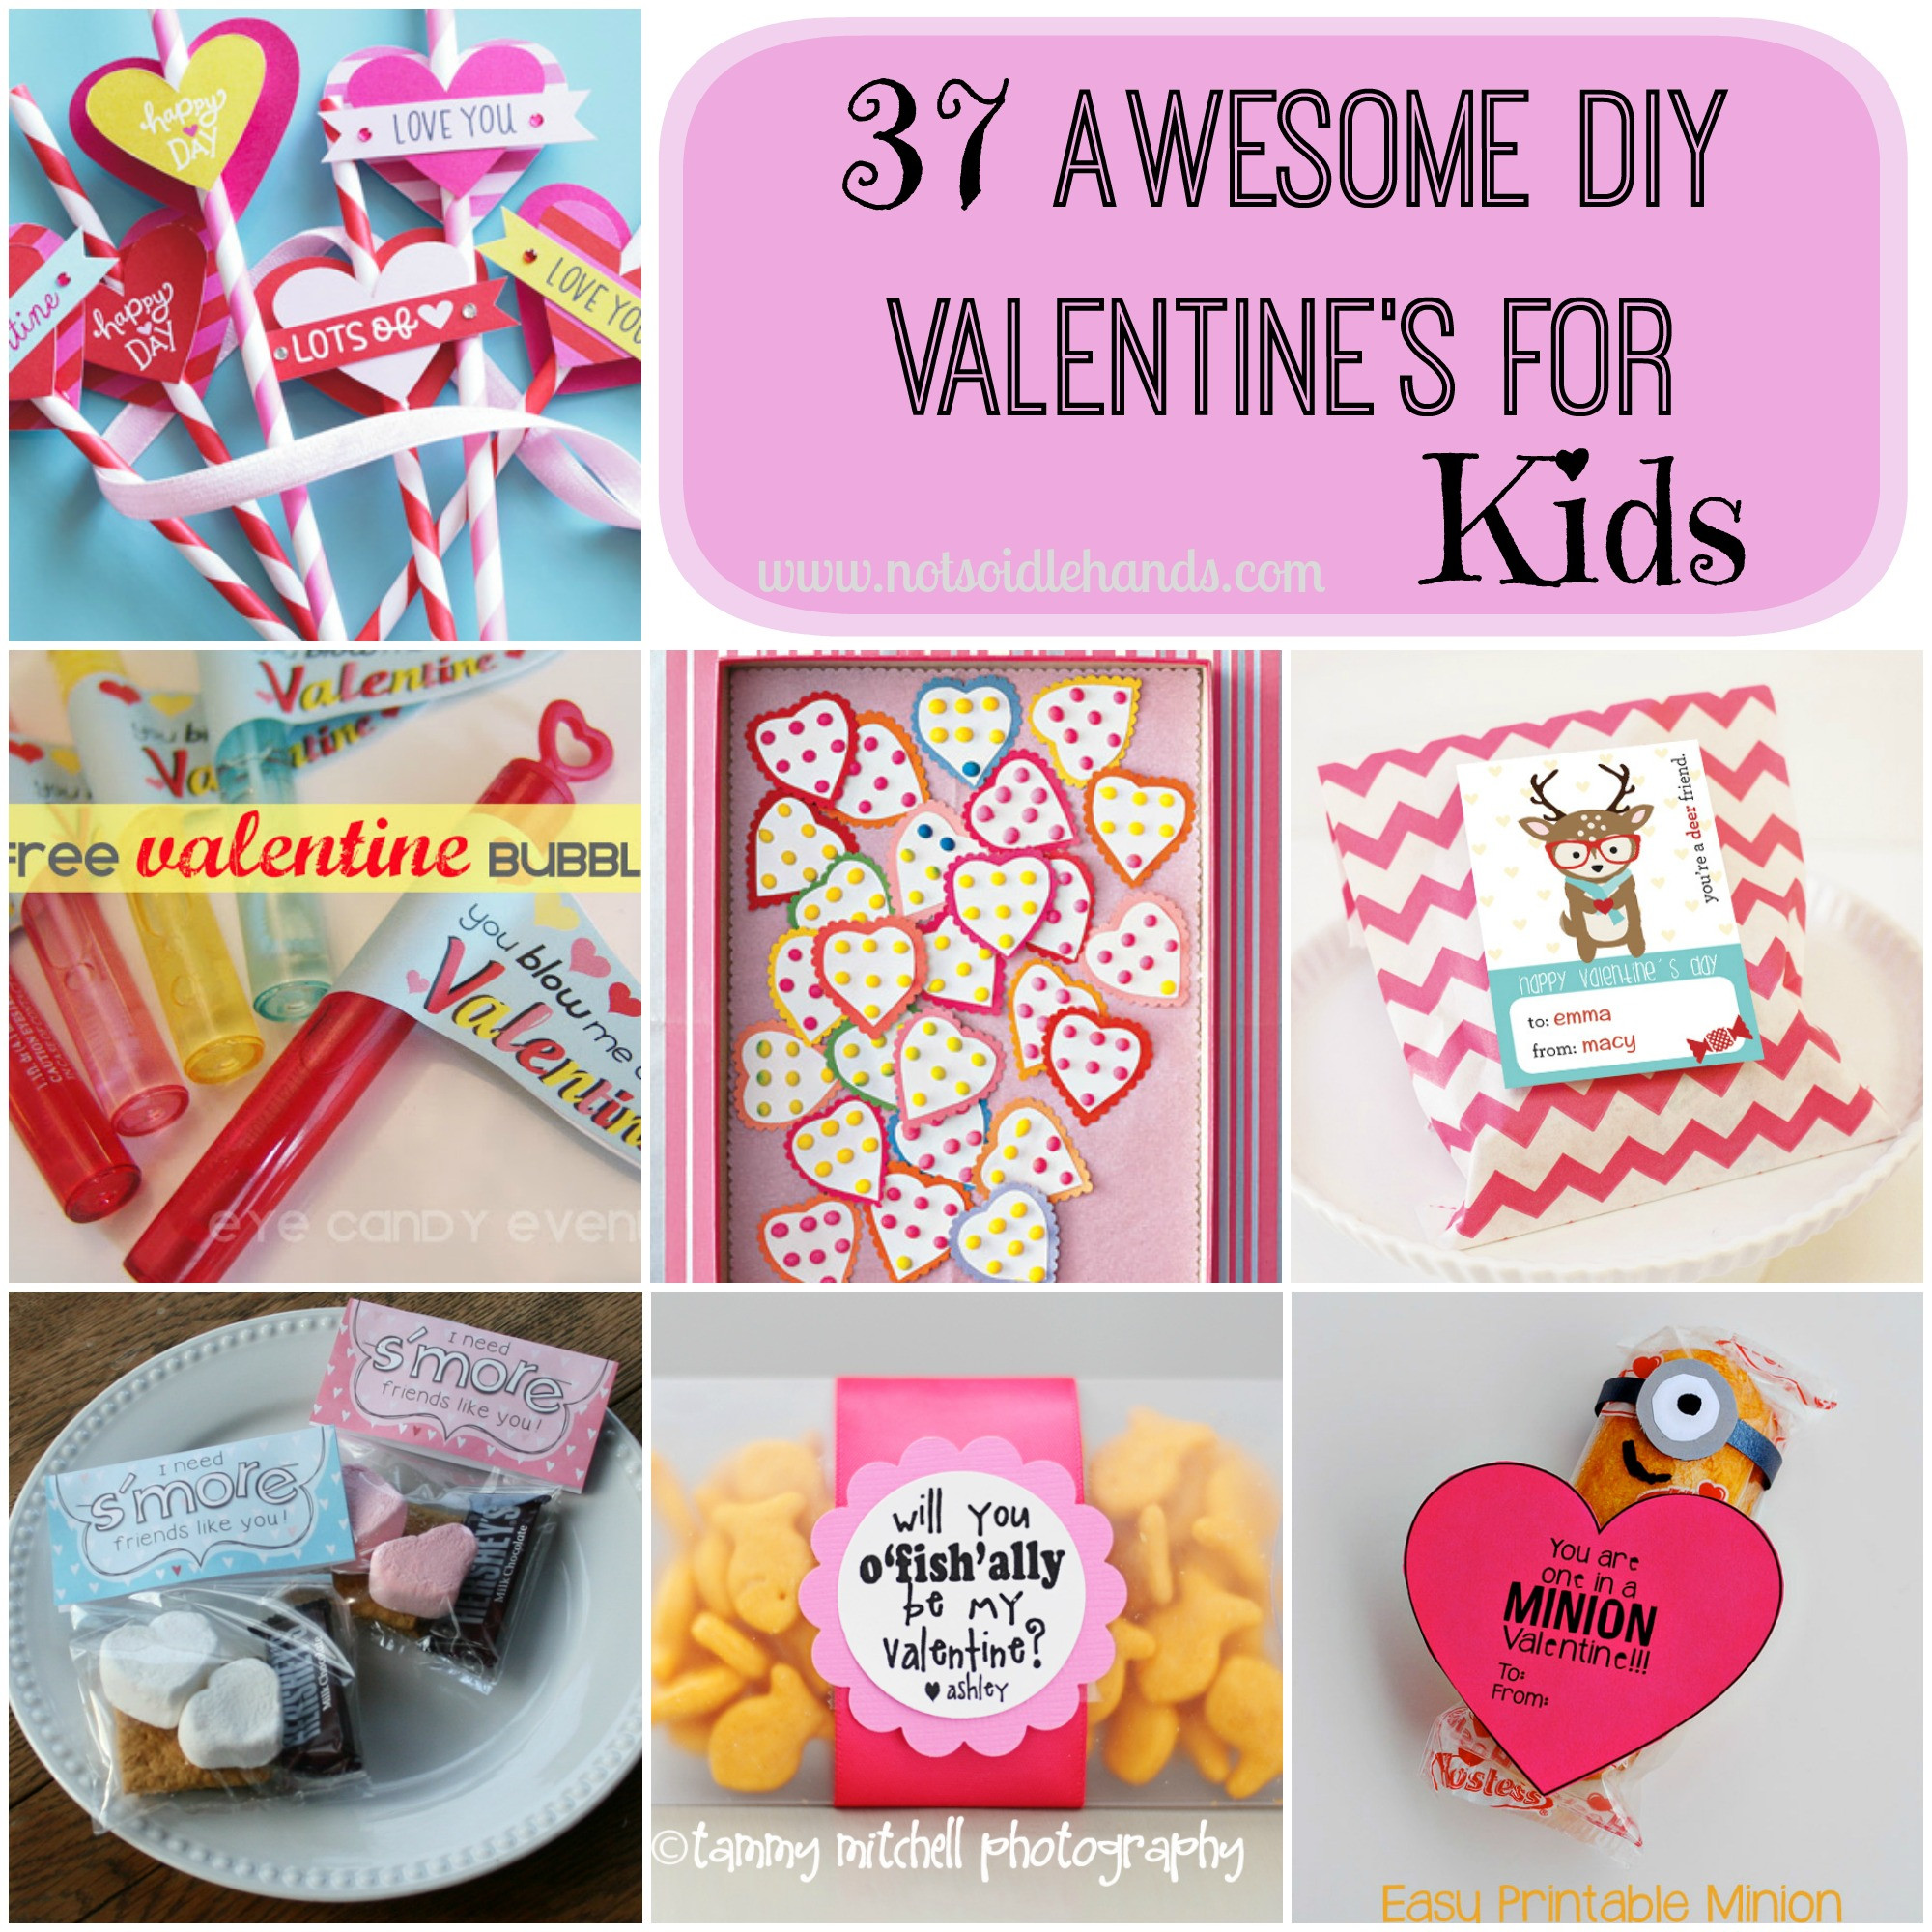 DIY Valentines For Toddlers
 37 Awesome DIY School Valentine’s for Kids